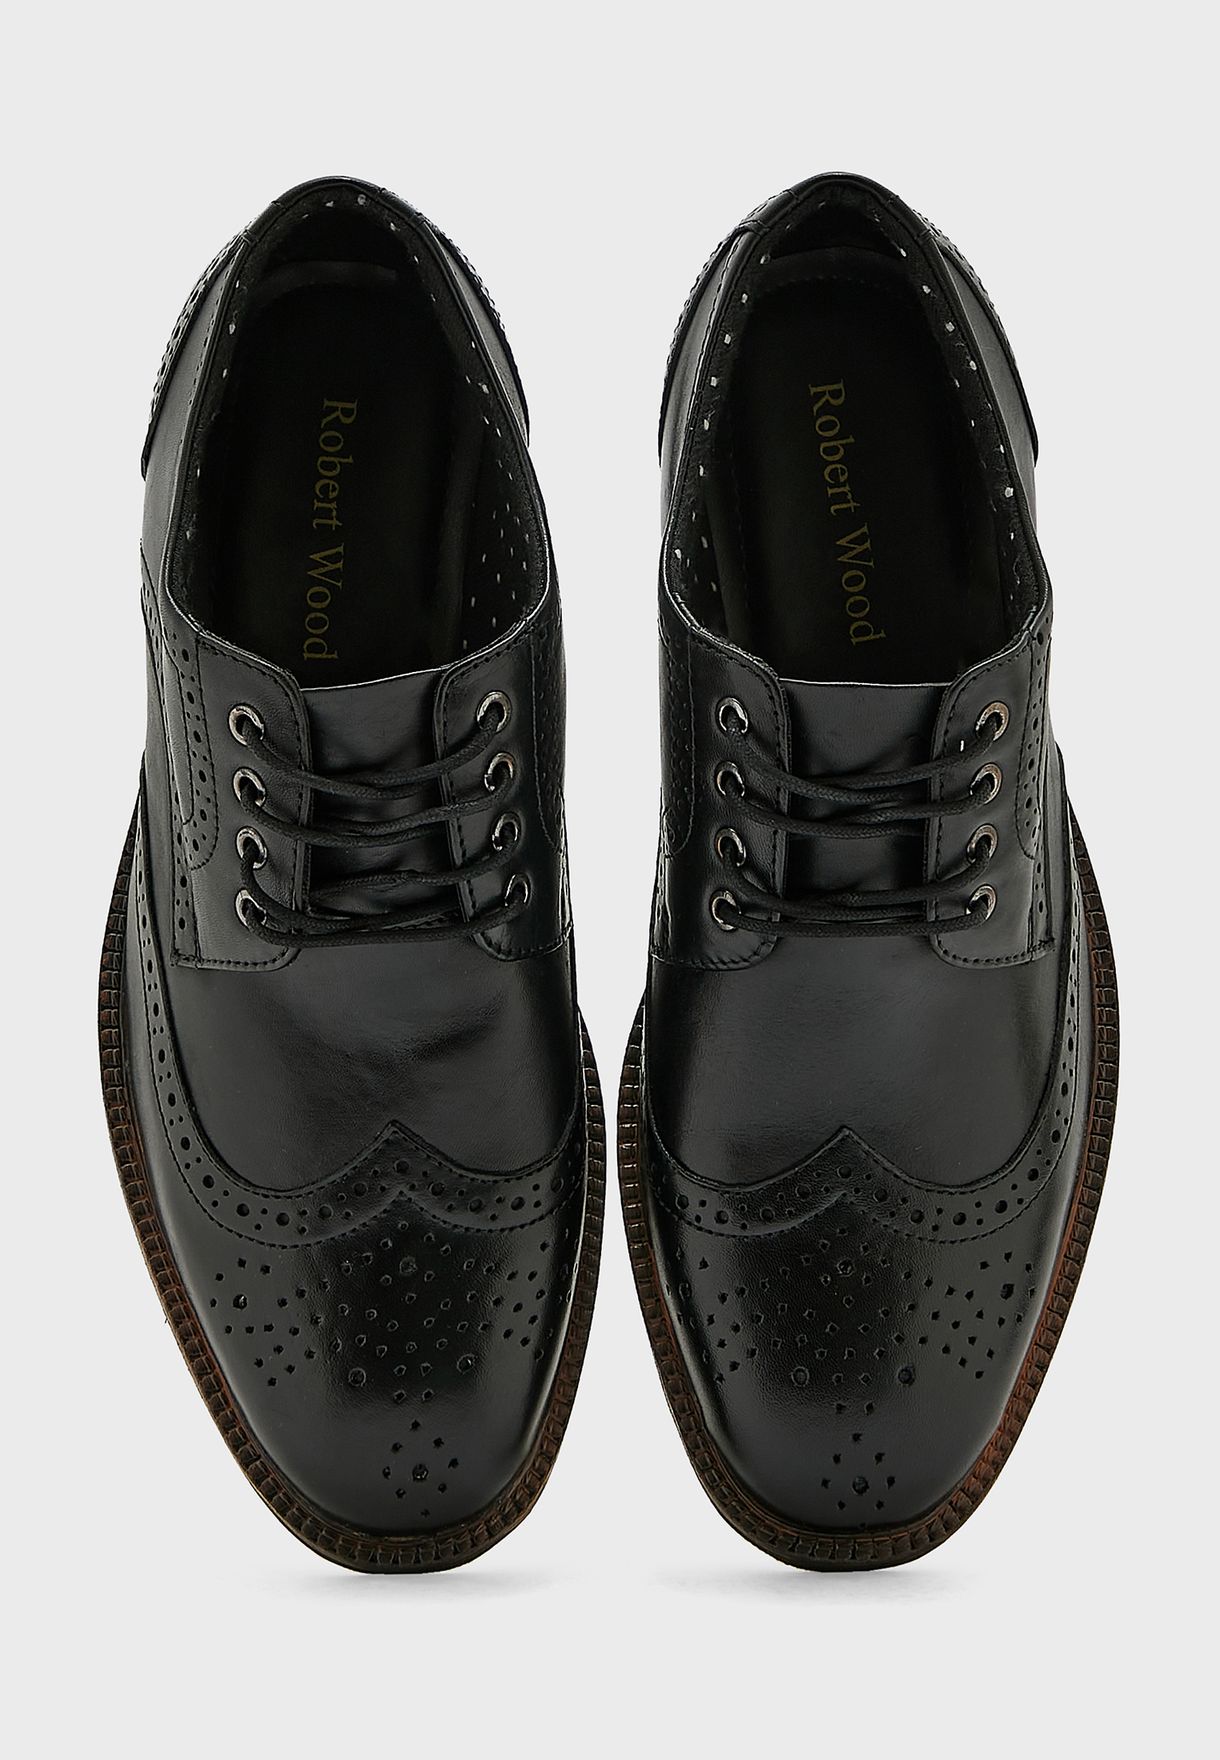 Genuine Leather Wing Cap Brogue Formal Lace Ups